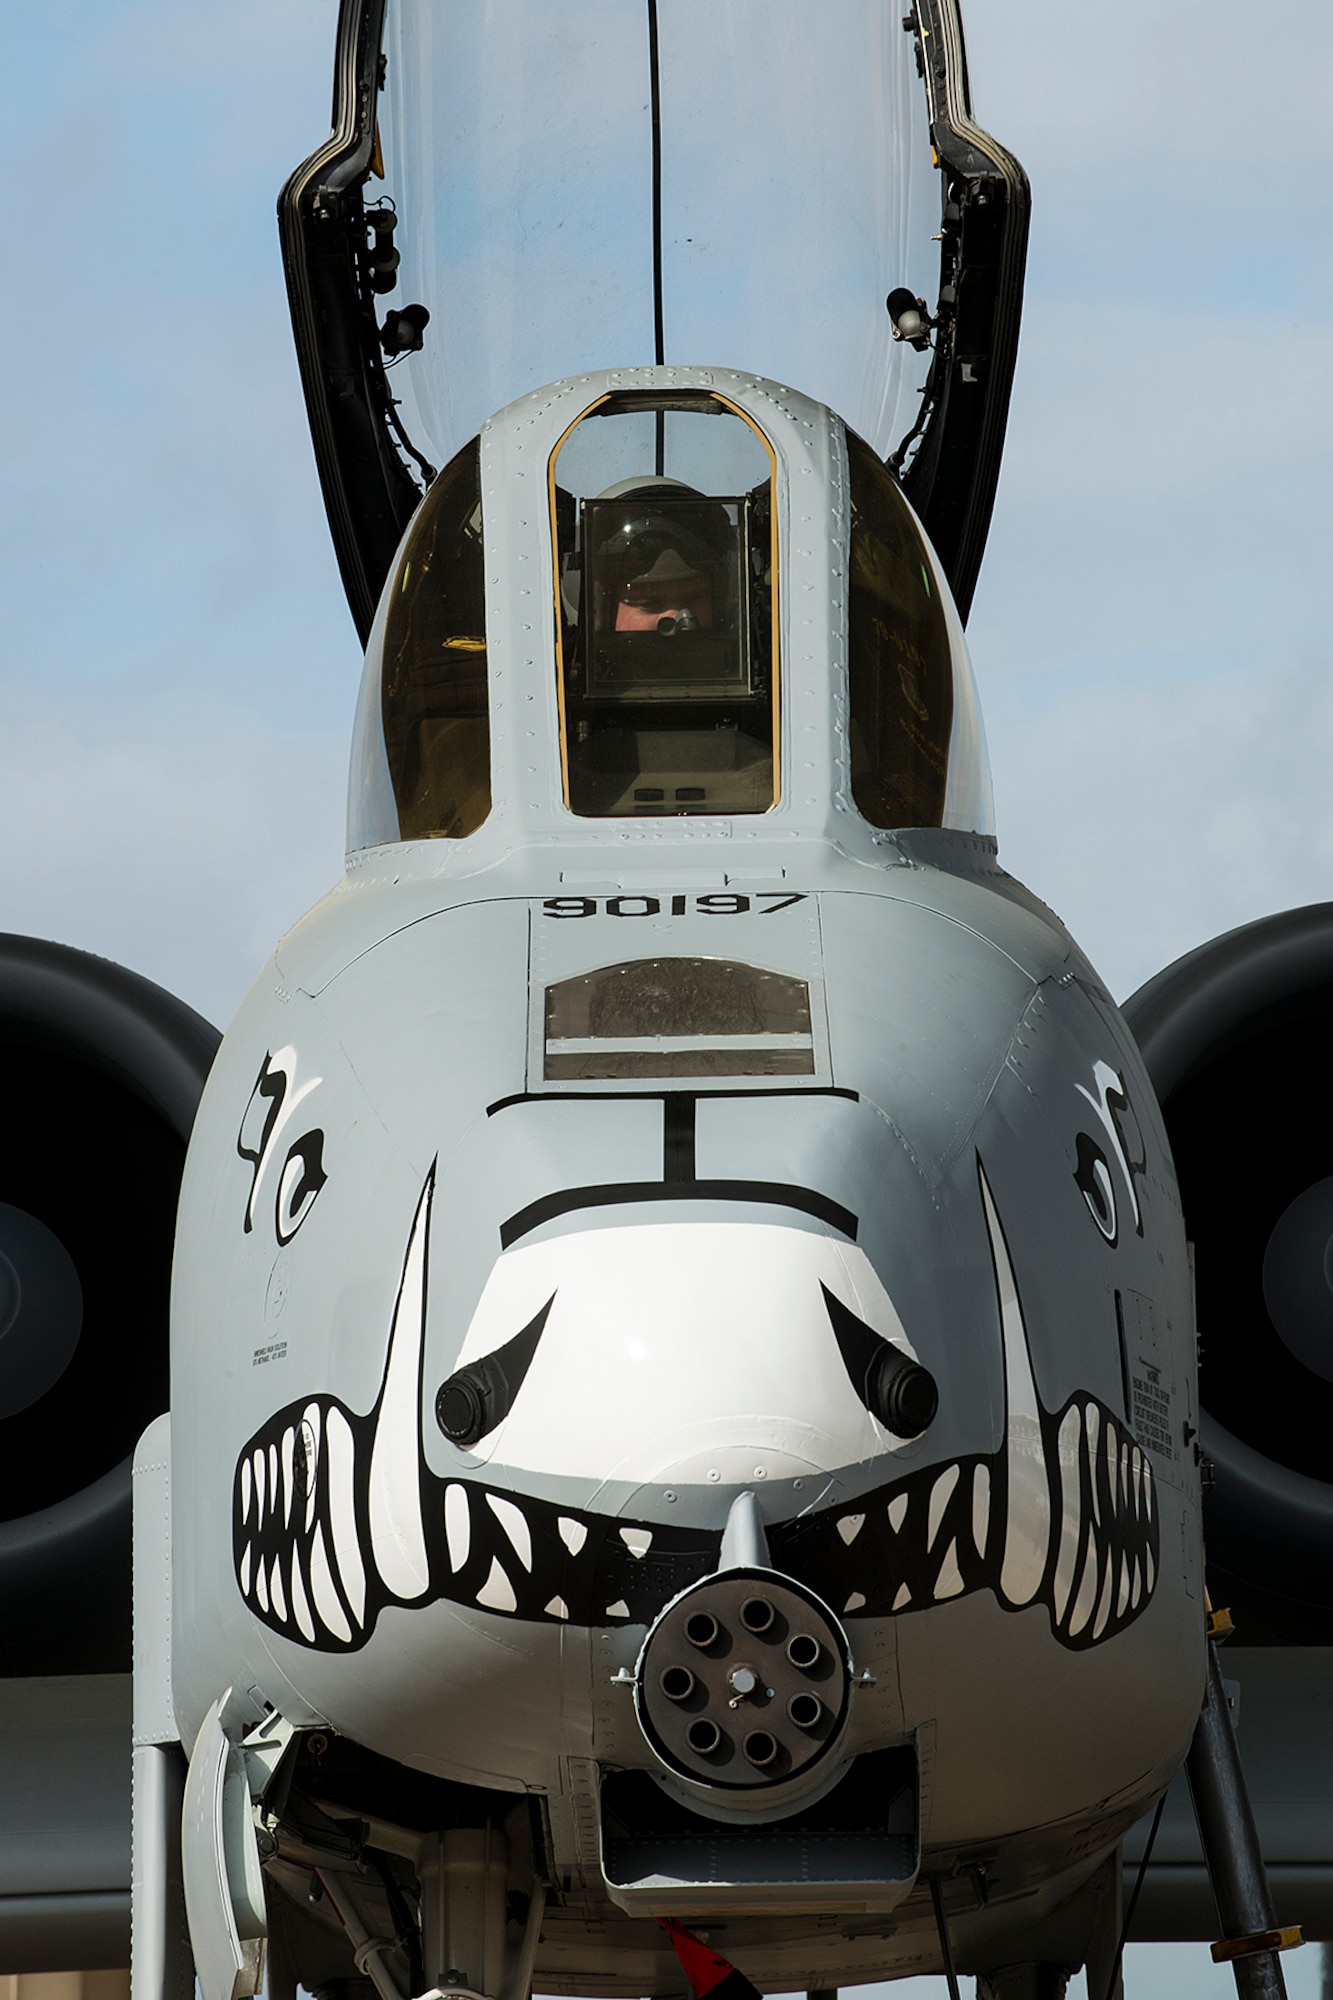 A 917th Fighter Group A-10 Thunderbolt II flown by U.S. Air Force Capt. Simon Long, prepares to leave on a sortie which it will never return from, April 8, 2013, Barksdale Air Force Base, La. The FG is scheduled to be inactivated in September 2013, and this A-10 is among the first three selected to leave Barksdale. (U.S. Air Force photo by Master Sgt. Greg Steele/Released)